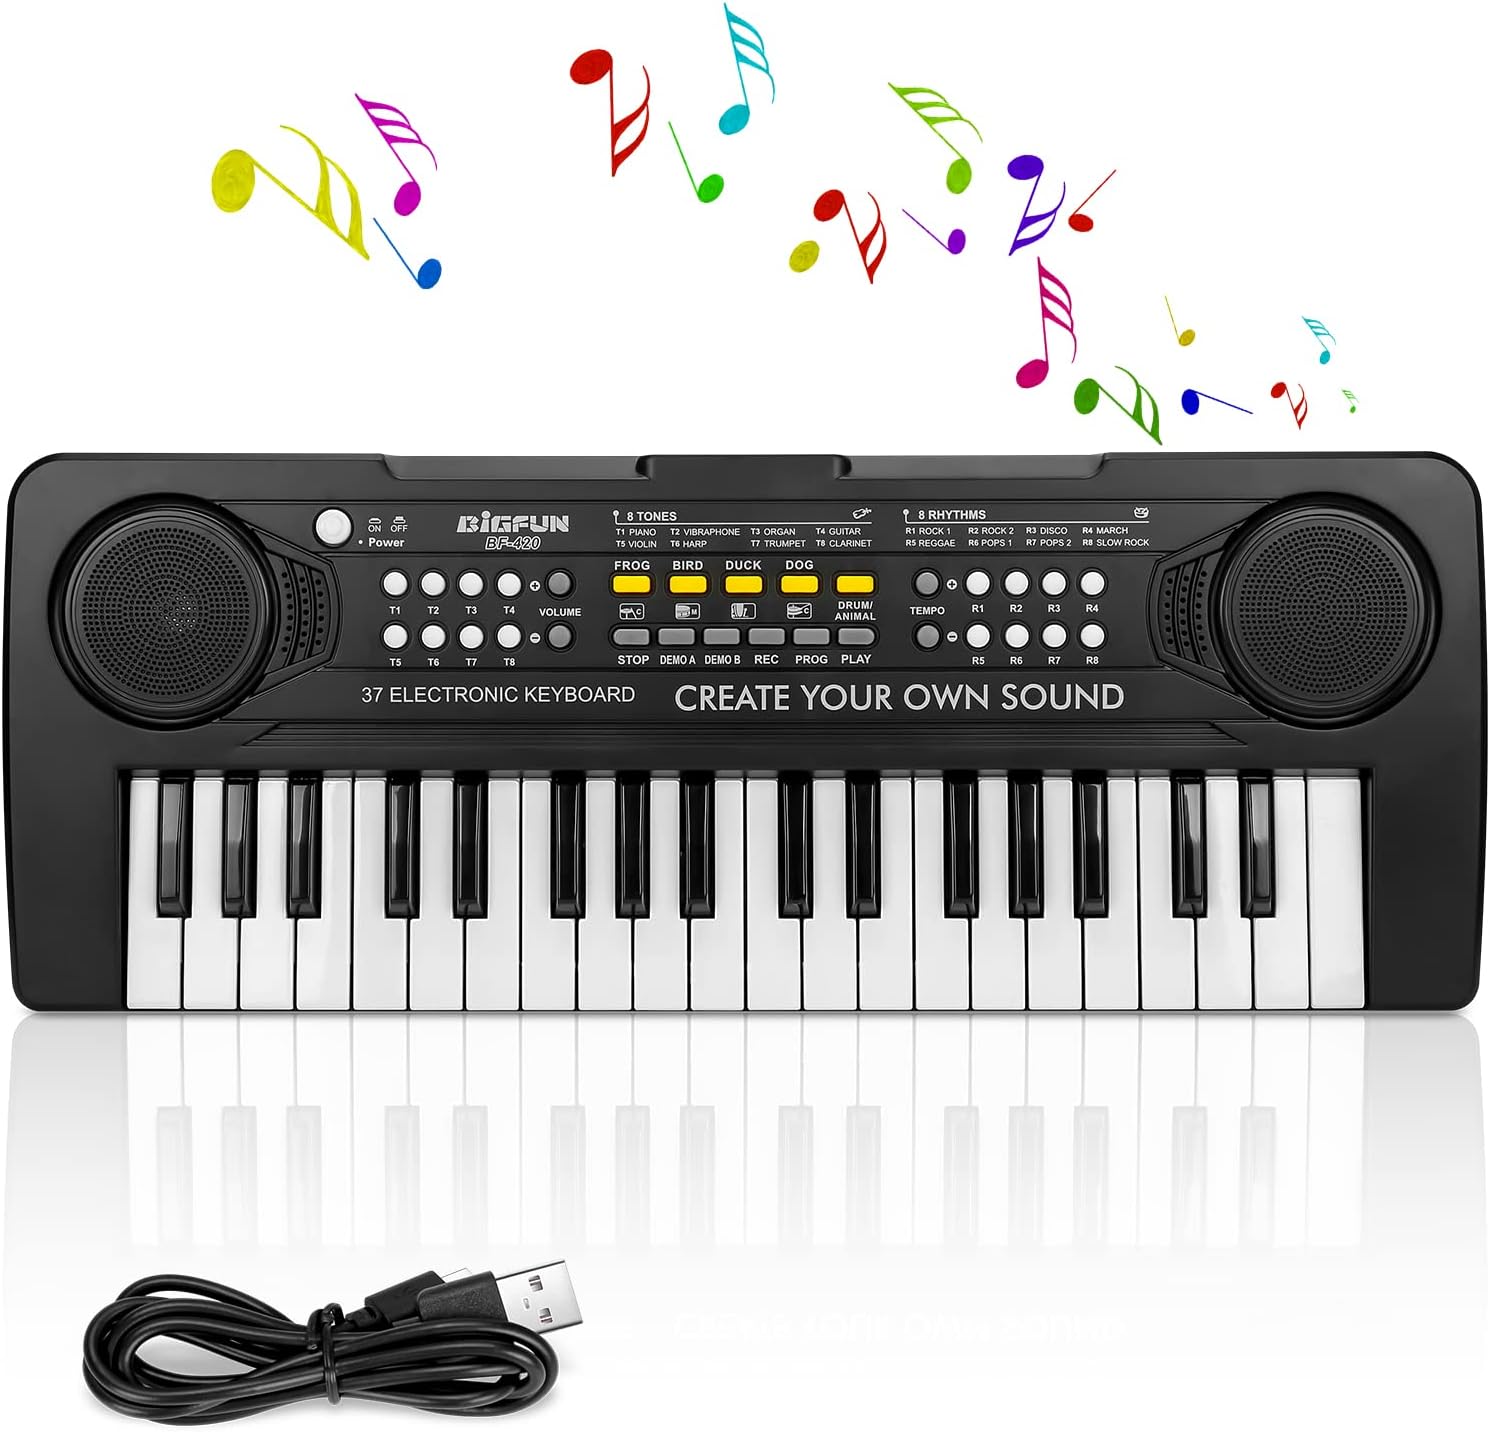 TOQIBO Kids Piano Keyboard, 37 Keys Electronic Piano for Kids Portable Multi-Function Musical Instruments Birthday Educational Gift Toys for 3 4 5 6 7 8 Year Old Boys Girls Children Beginner(Black) : Toys Games